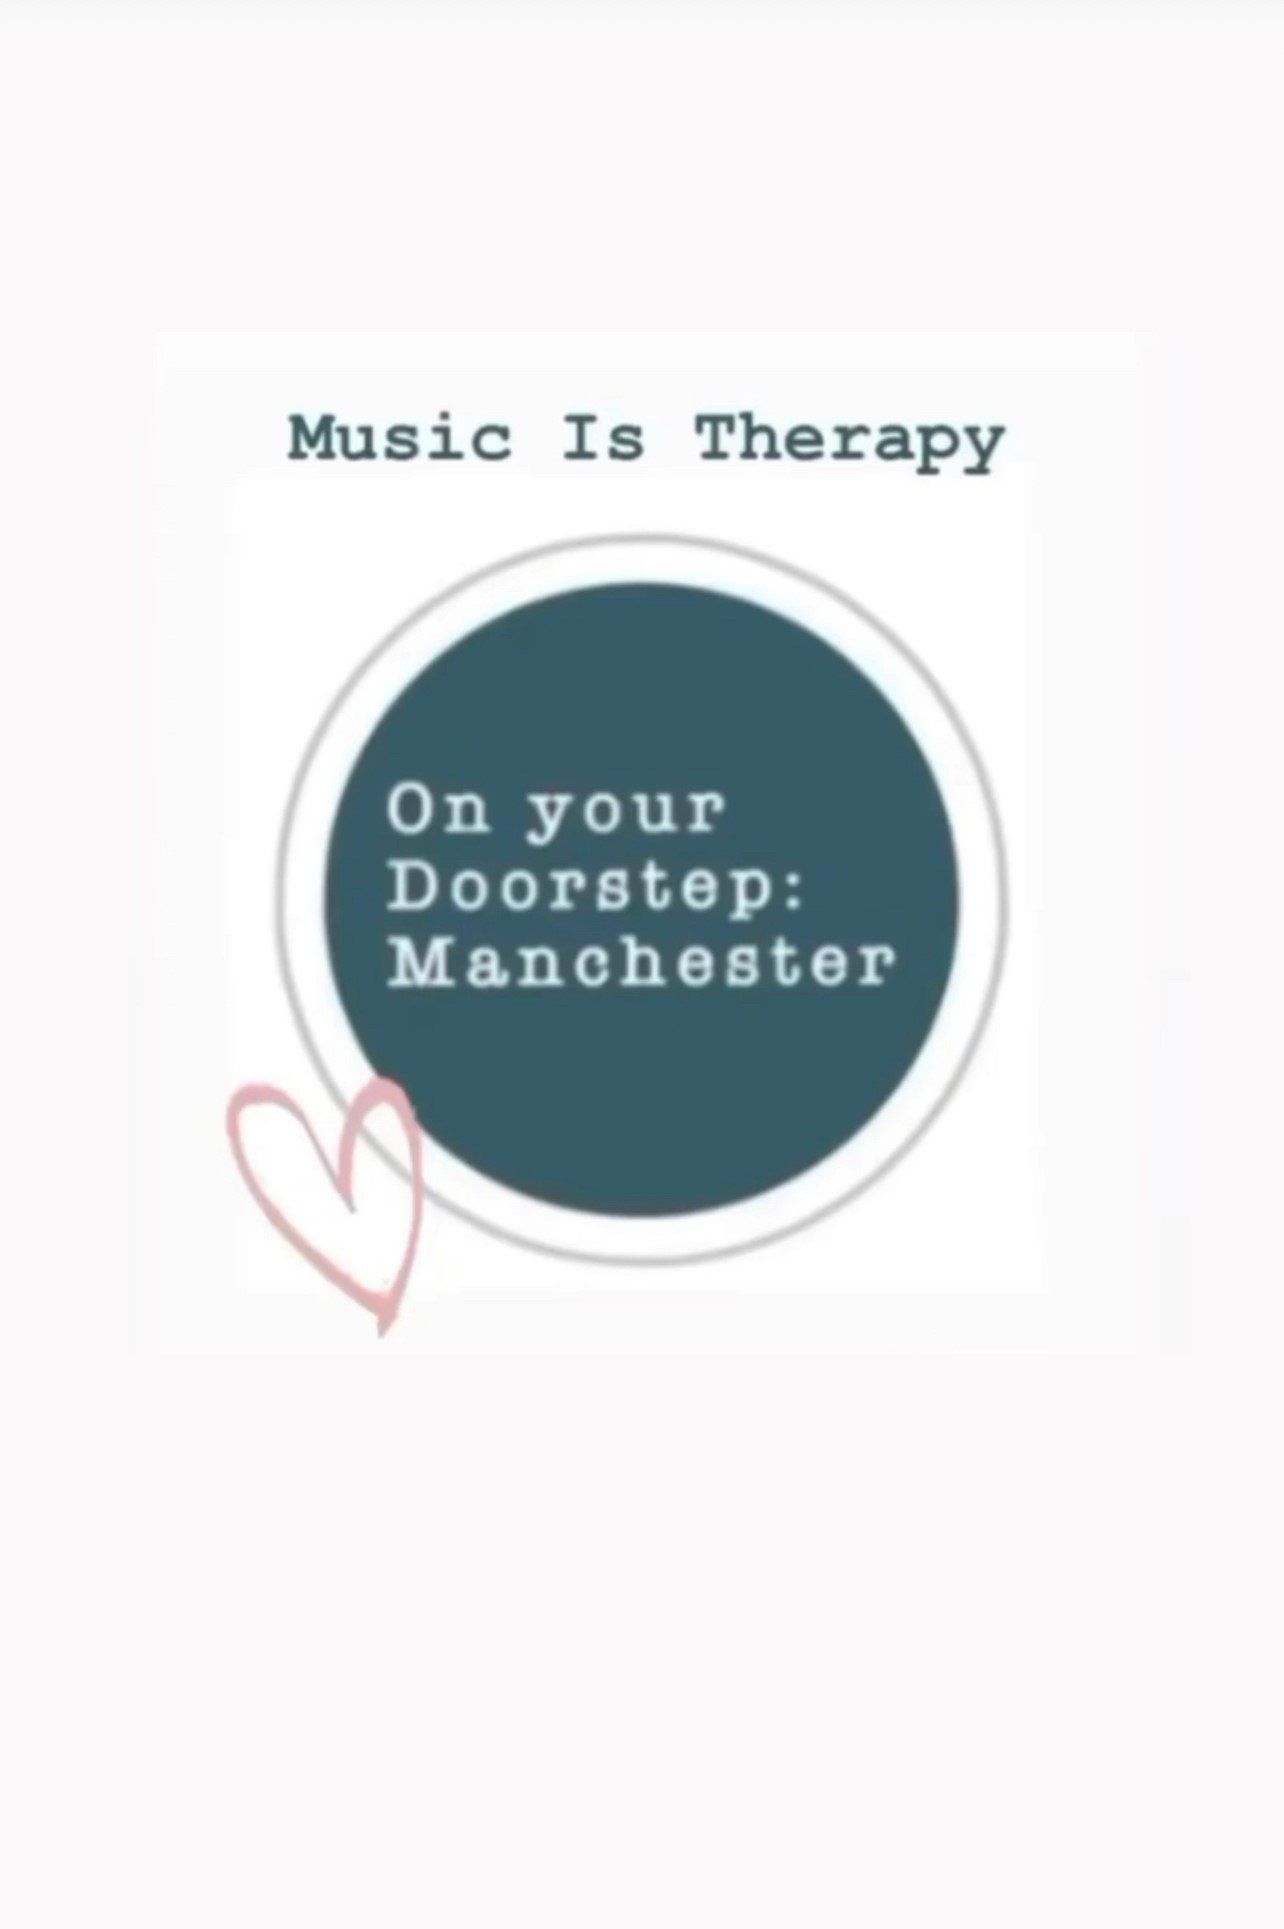 Music is a valid therapy. It can potentially reduce depression and anxiety, as well as improve mood, self-esteem, and quality of life. Here some of Manchesters finest musicians, artists, DJs, comedians and creatives, share some of their favourite music with you. A chance to switch off with a brew, soundtrack your walk/run/commute, or just tunes to stick on when you need to just relax for a little while. Music therapy is also used to aid physical discomfort by improving respiration and lowering blood pressure. It can improve cardiac output, reduce heart rate and relax muscle tension. For mental health, this form of therapy is great for reducing stress.  Massive thanks to all our guest contributors, who have provided a selection of playlists to cover all bases. Whether it's soothing ballads, uplifting house, folk, blues, rock n roll or some world music to escape to somewhere else.... Just follow the links, press play and enjoy!